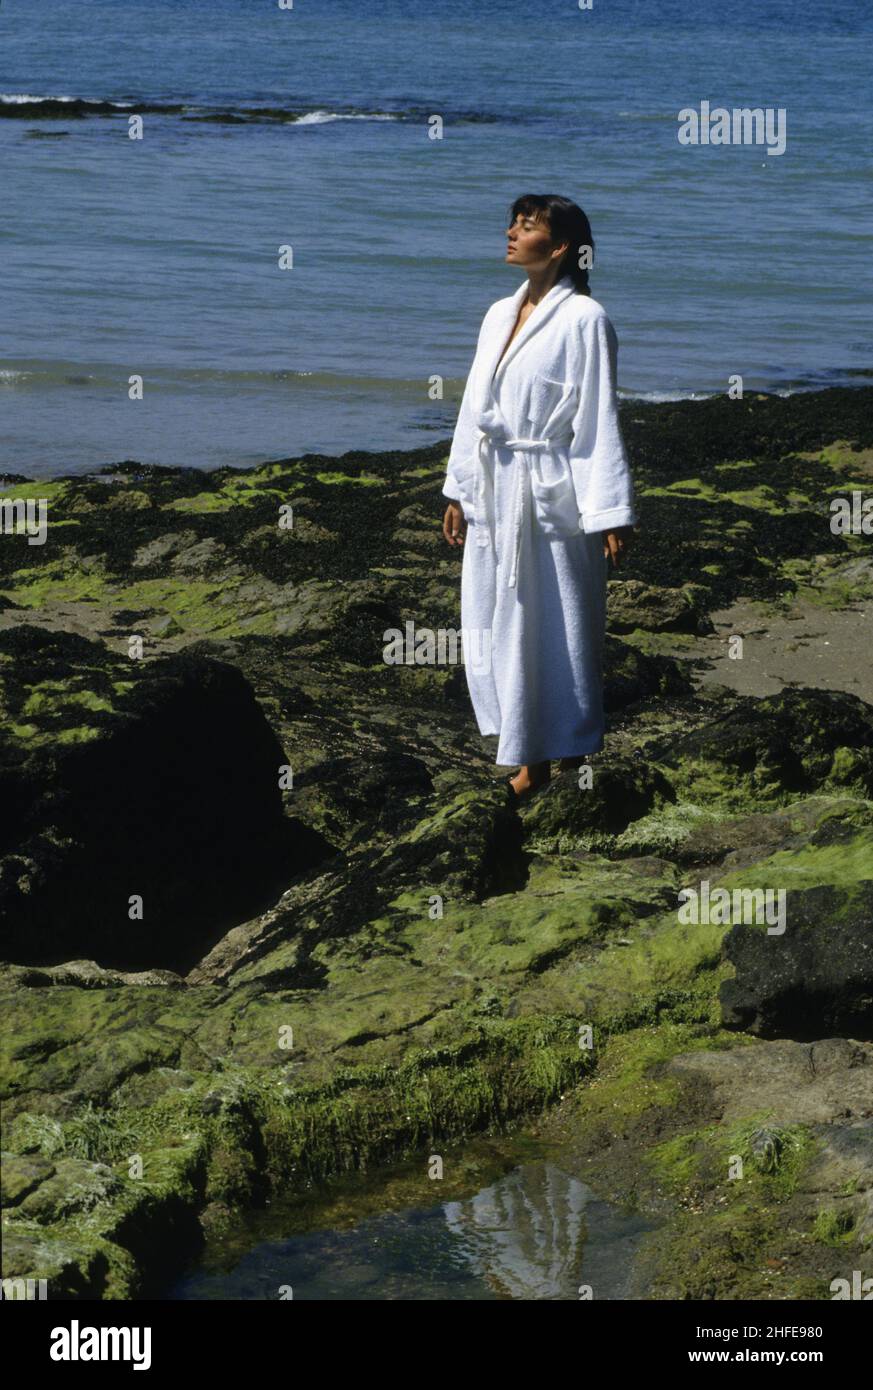 dark hair young woman stand up with white thalassotherapy dressing gown  walking on beach rock plenty of seagrass Stock Photo